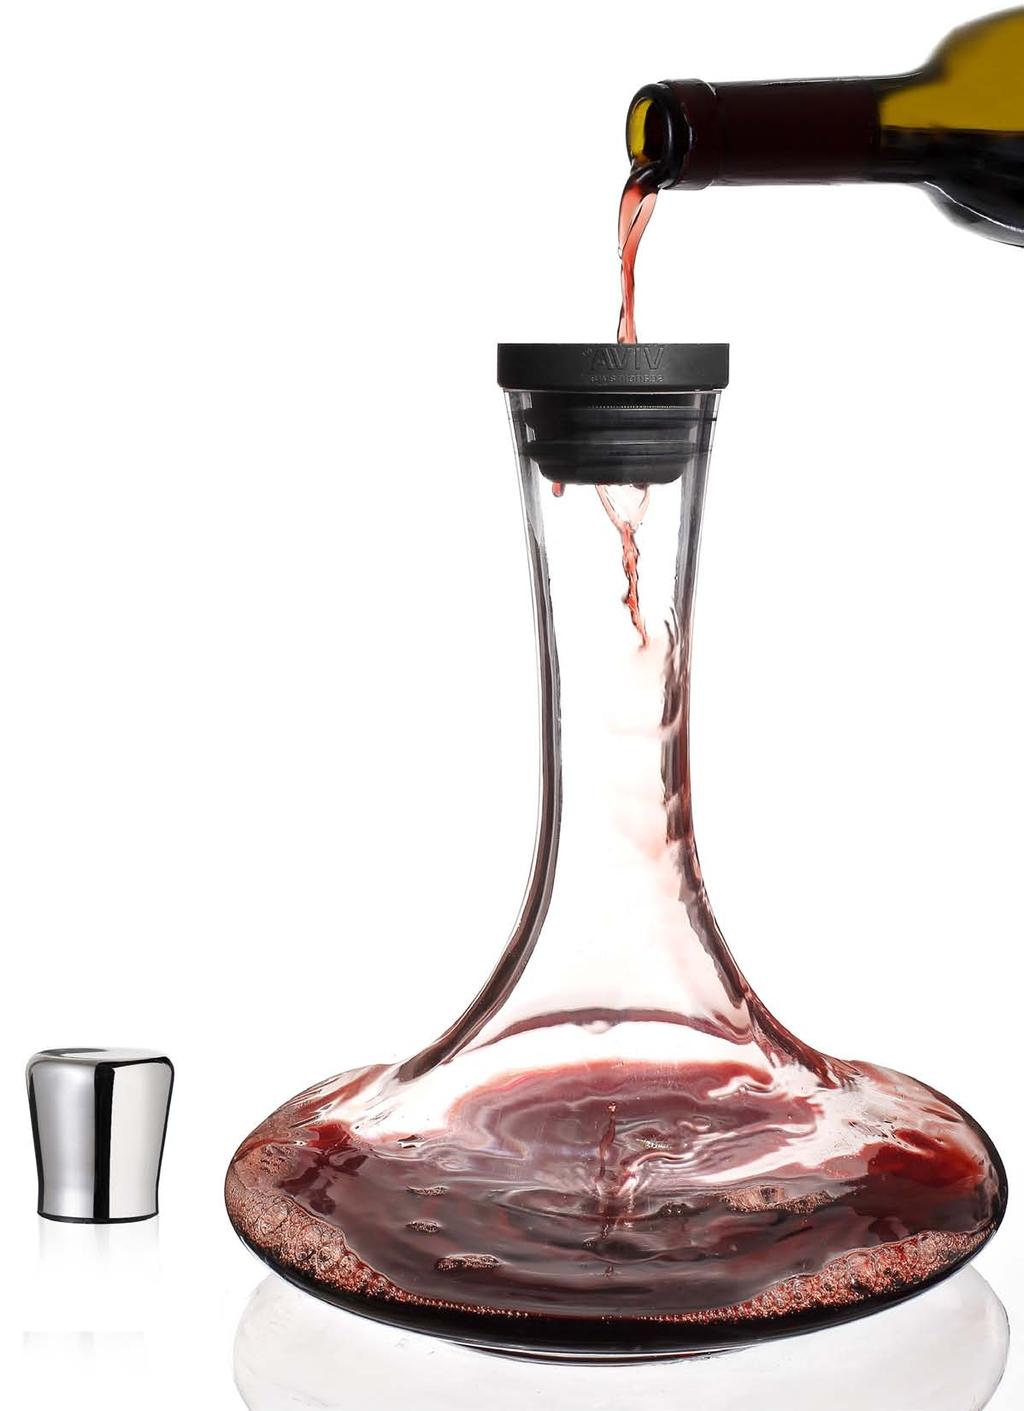 This provides complete aeration so bigger wines are immediately ready to drink.